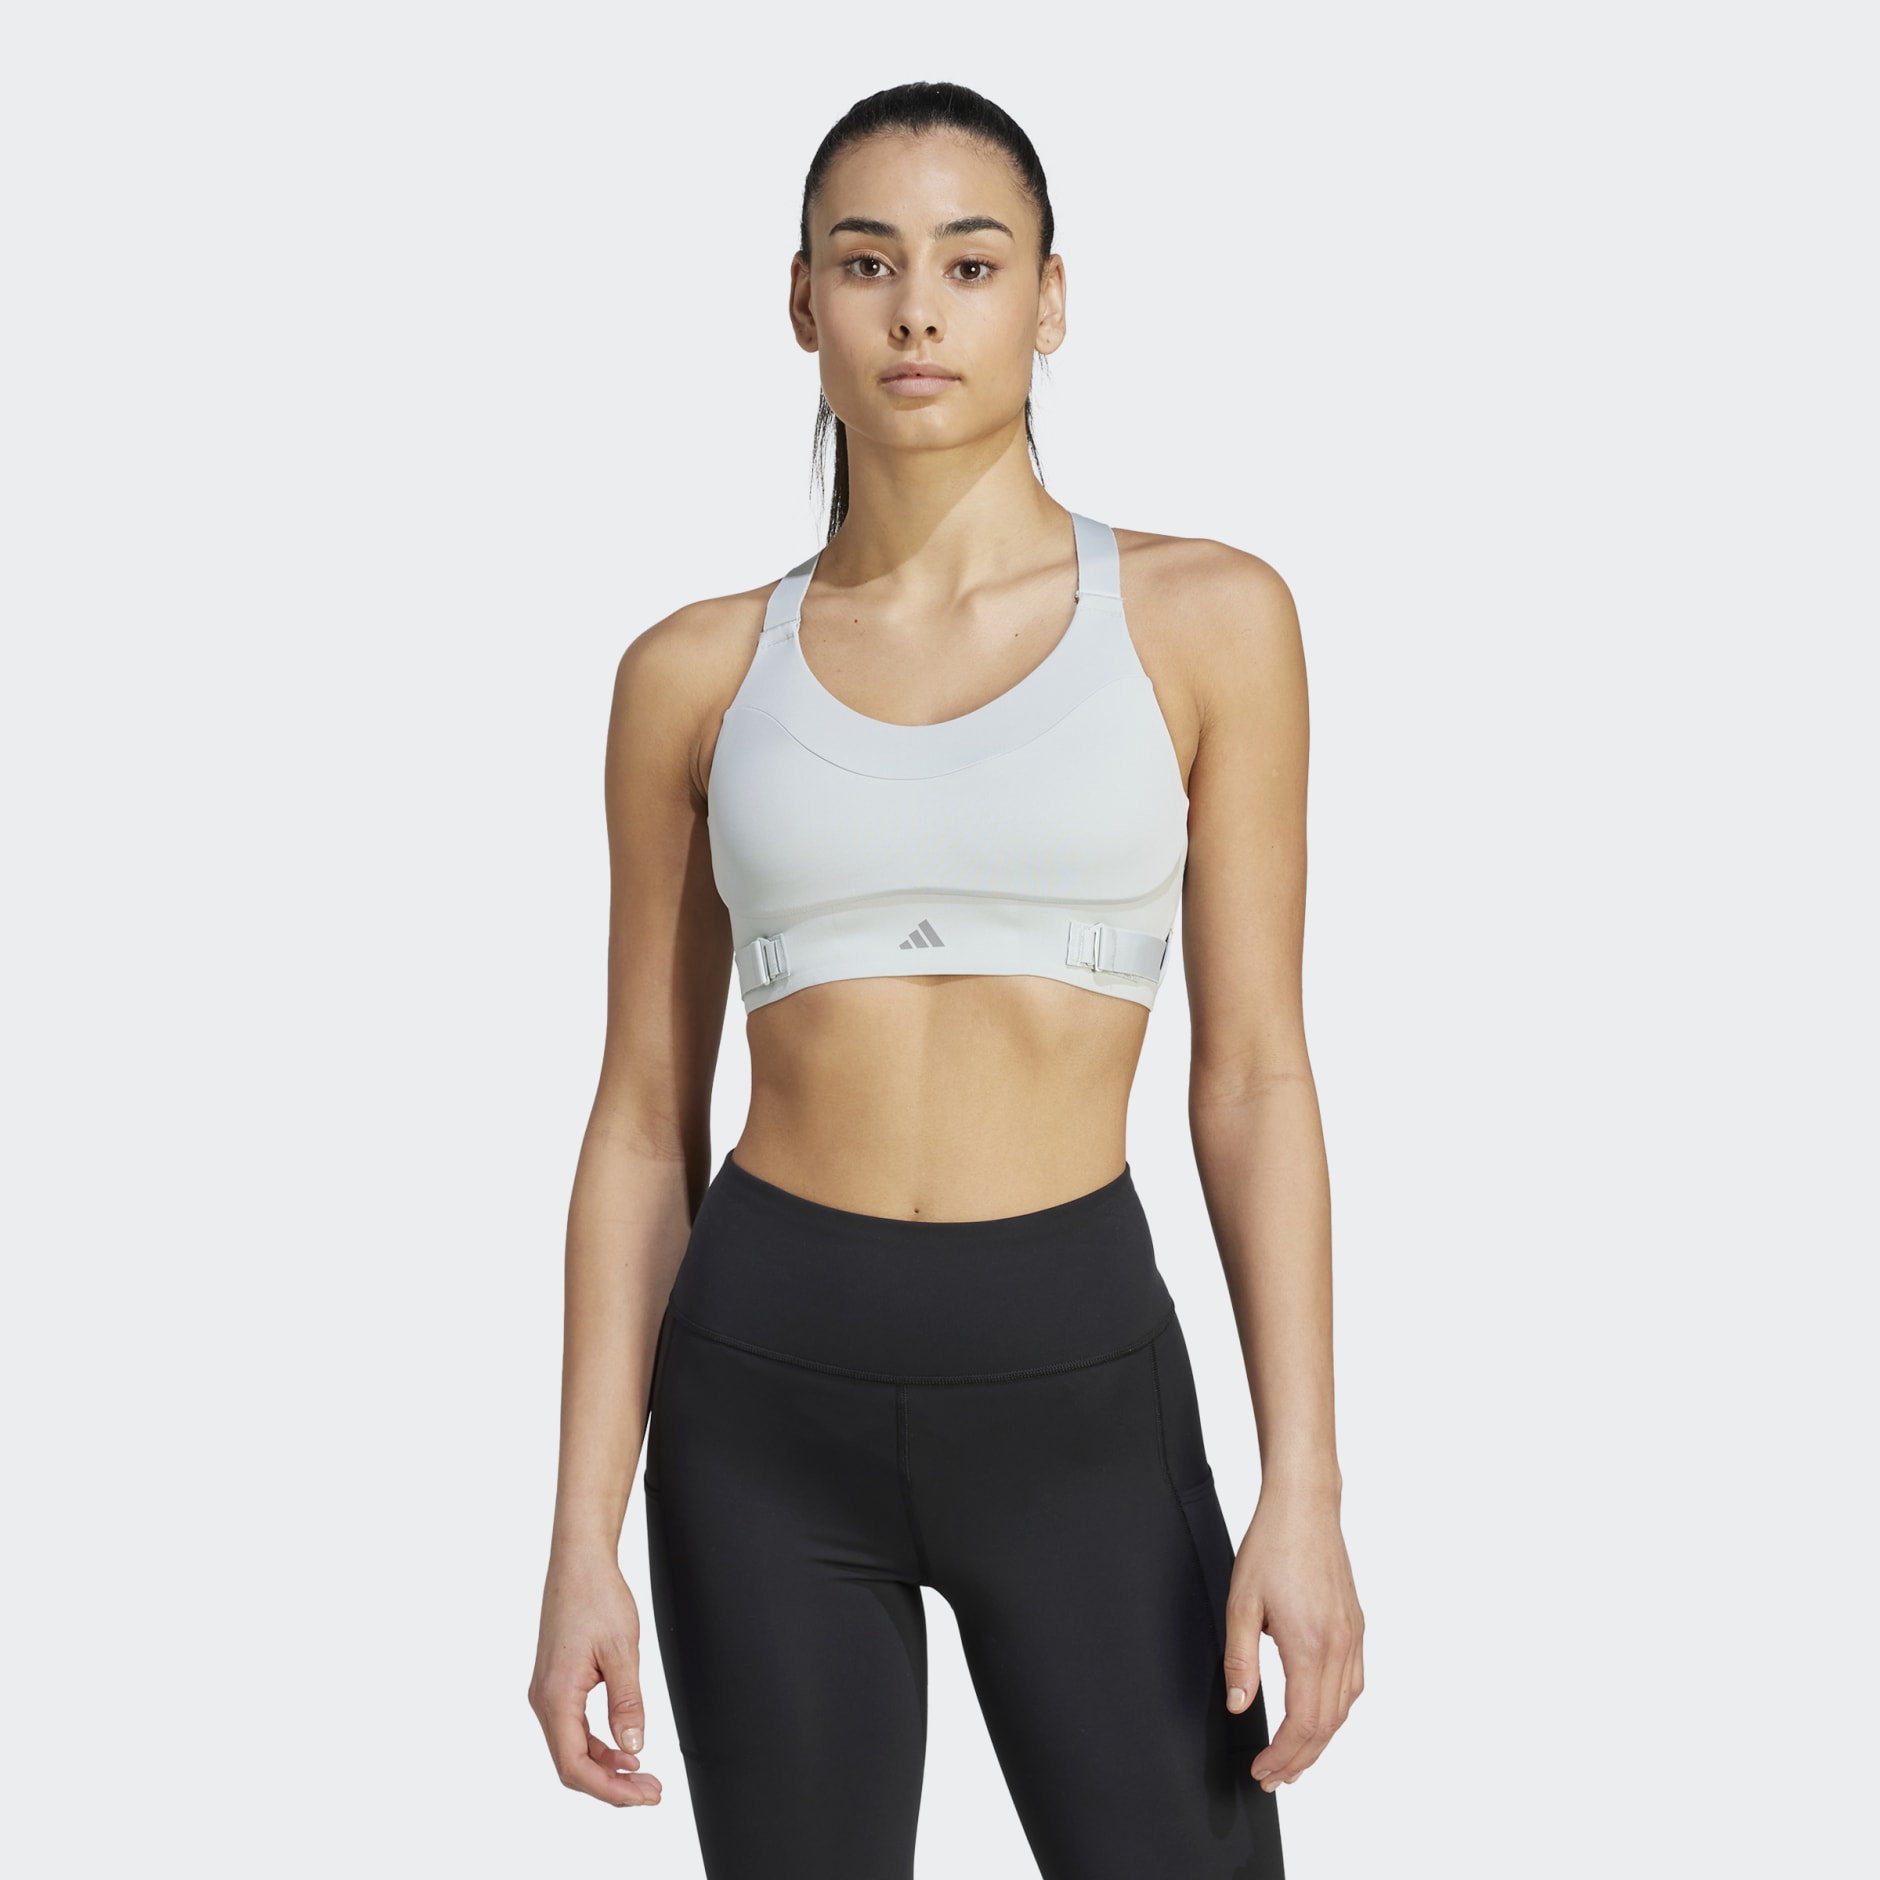 Women's Clothing - Collective Power Fastimpact Luxe High-Support Bra - Grey